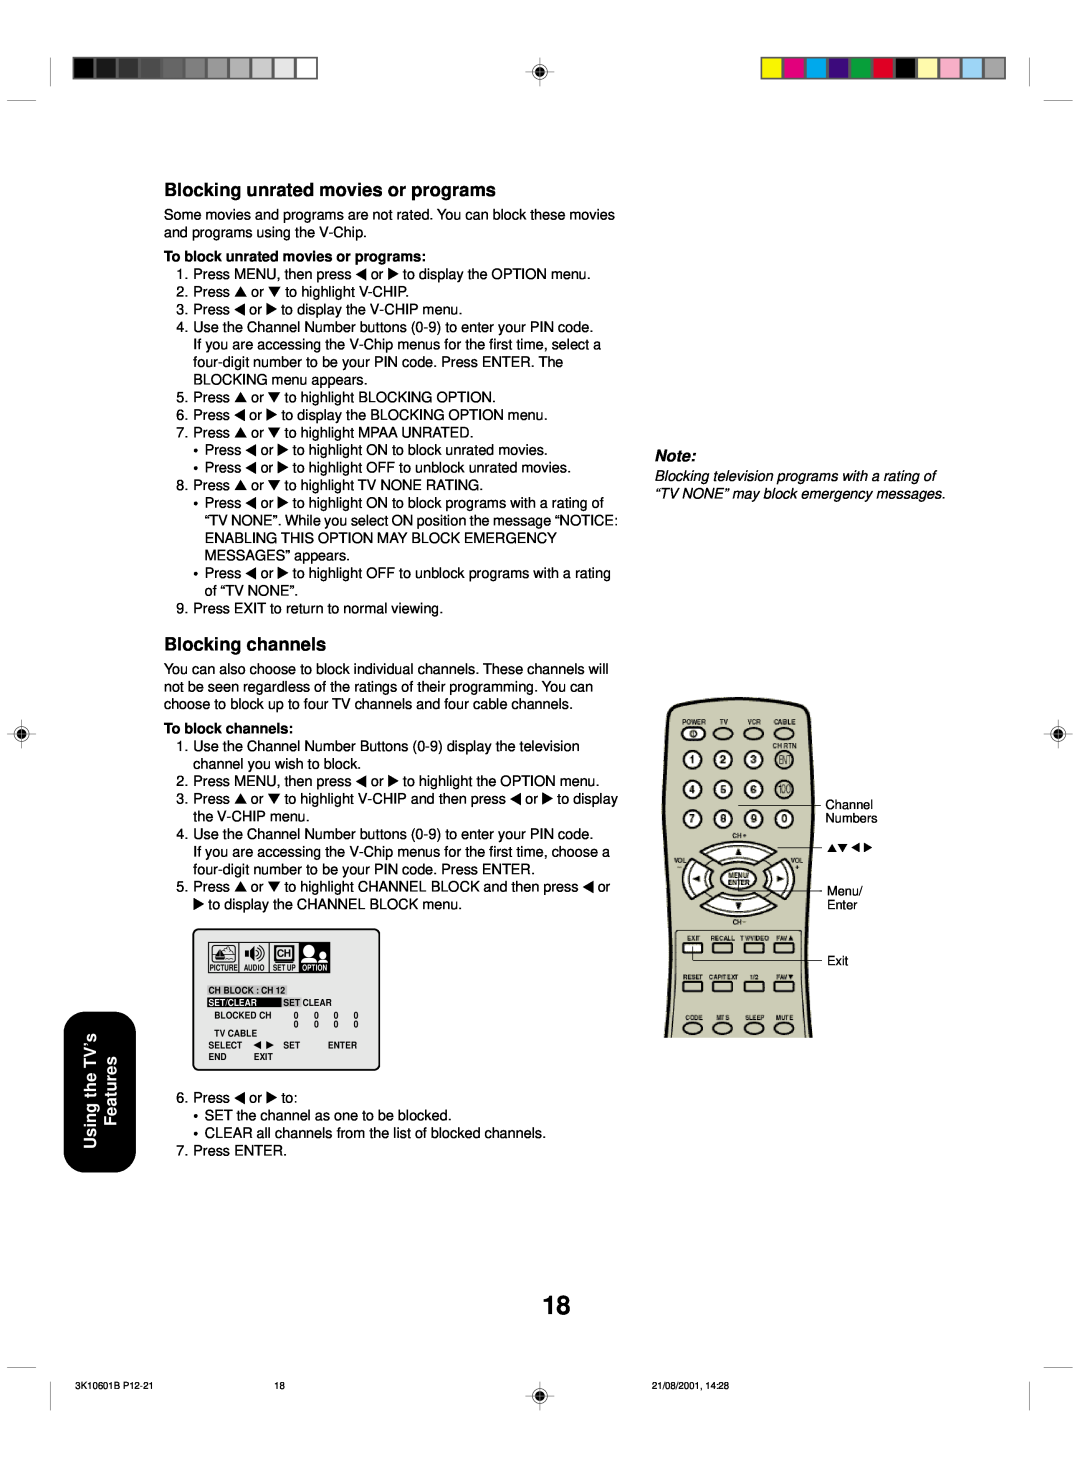 Toshiba 27A41 appendix Blocking unrated movies or programs, Blocking channels, Using the TV’s Features, To block channels 